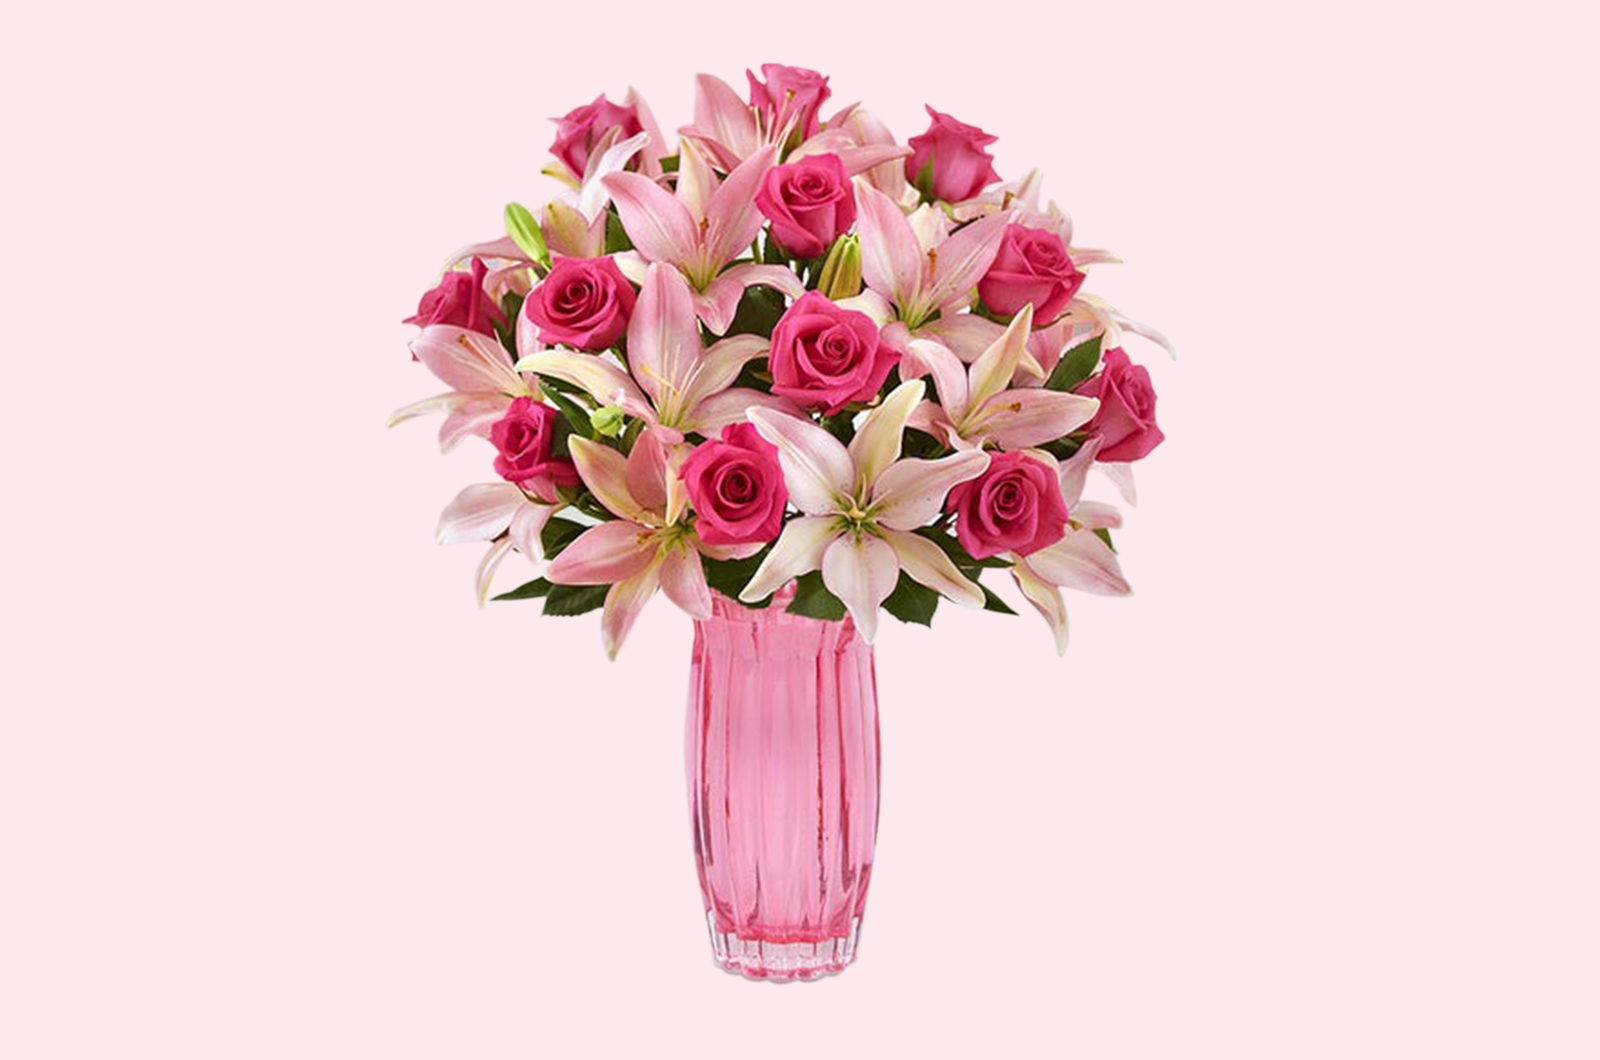 Best Flower Delivery Service Deals Where To Order Flowers Money